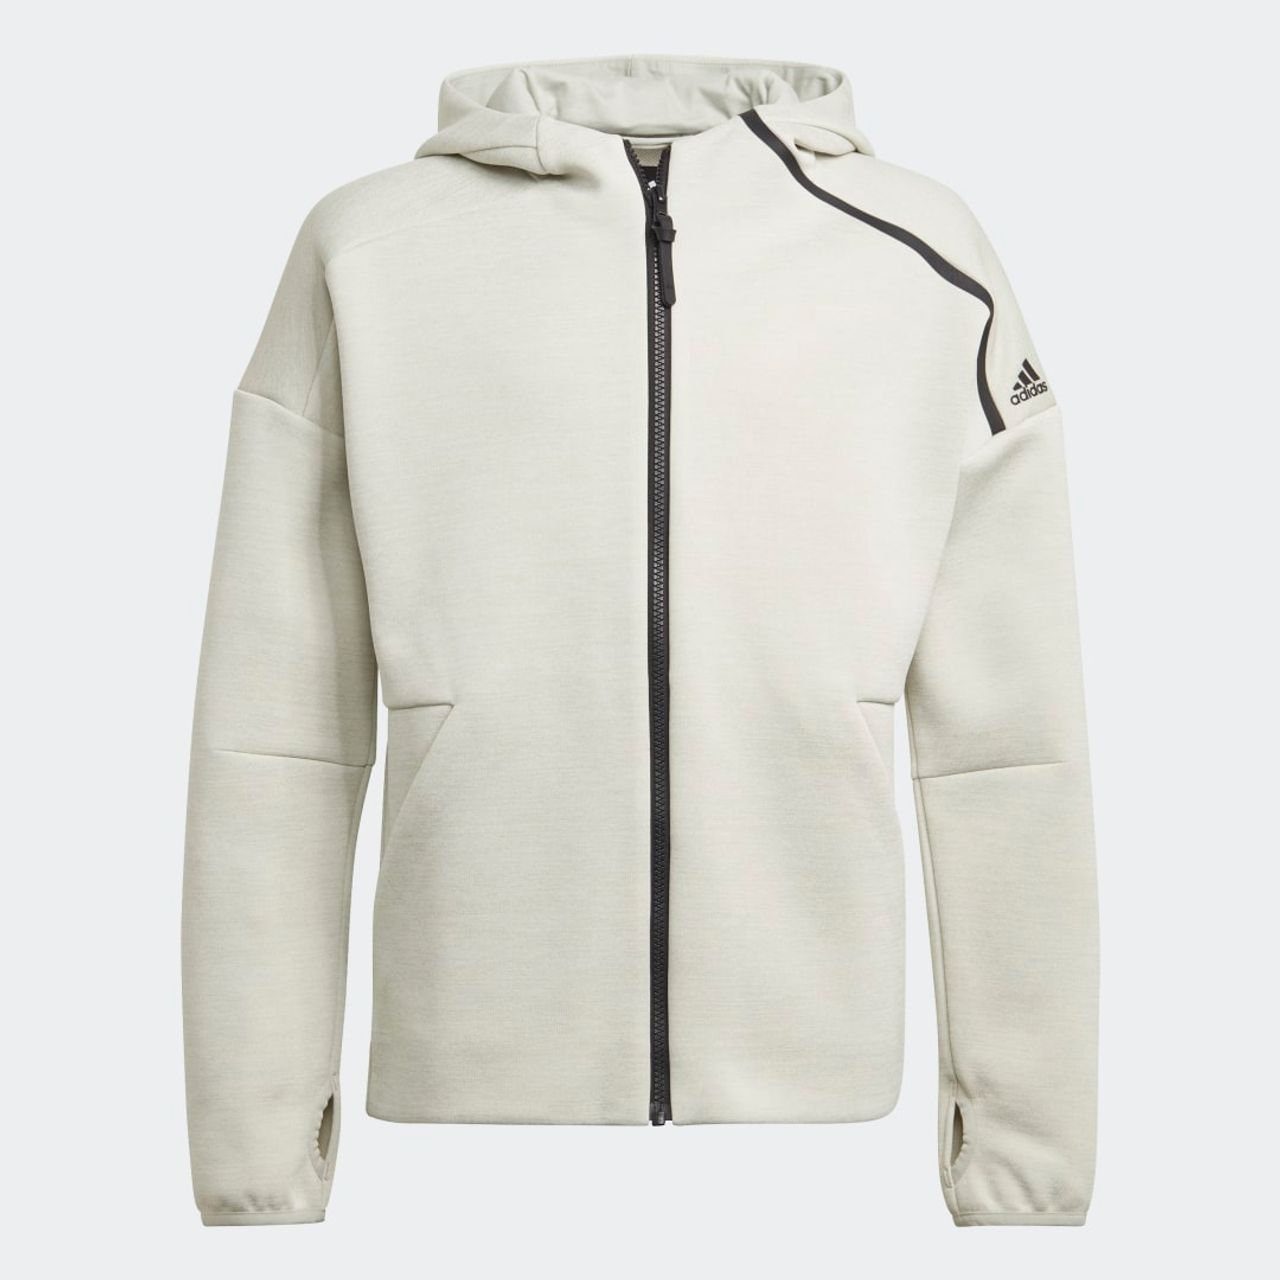 Adidas Z N E Sportswear Hoodie Feat Fast Release Zipper Gt2524 Compare Prices